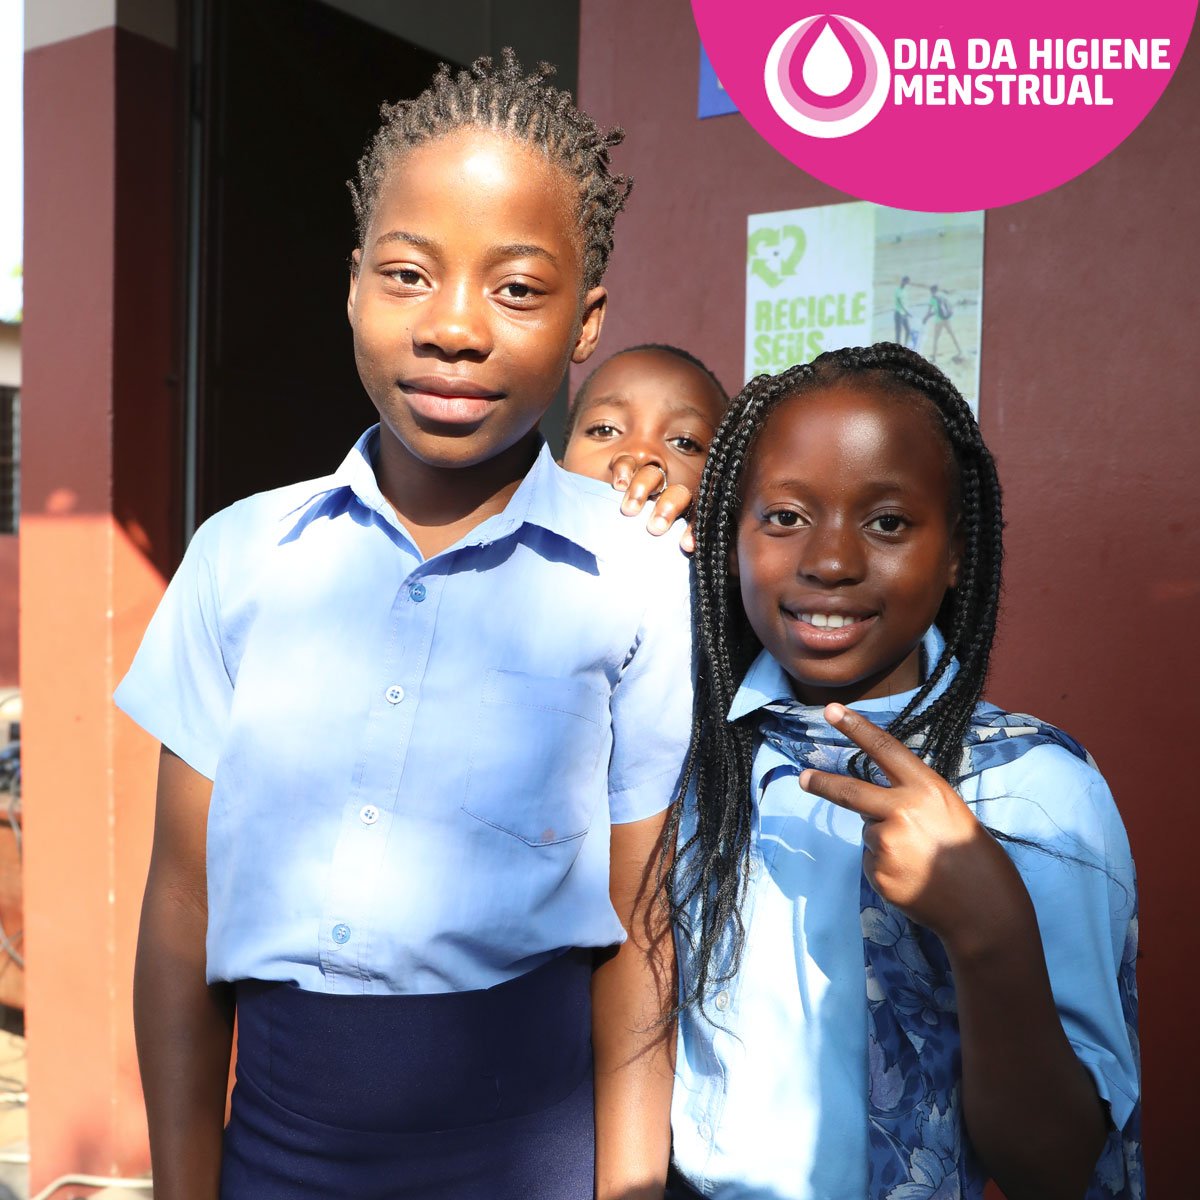 On Menstrual Hygiene Day and every day, UNICEF works with partners in Mozambique to improve menstrual health and hygiene for all menstruating persons. #MHDay2024 #WeAreCommitted